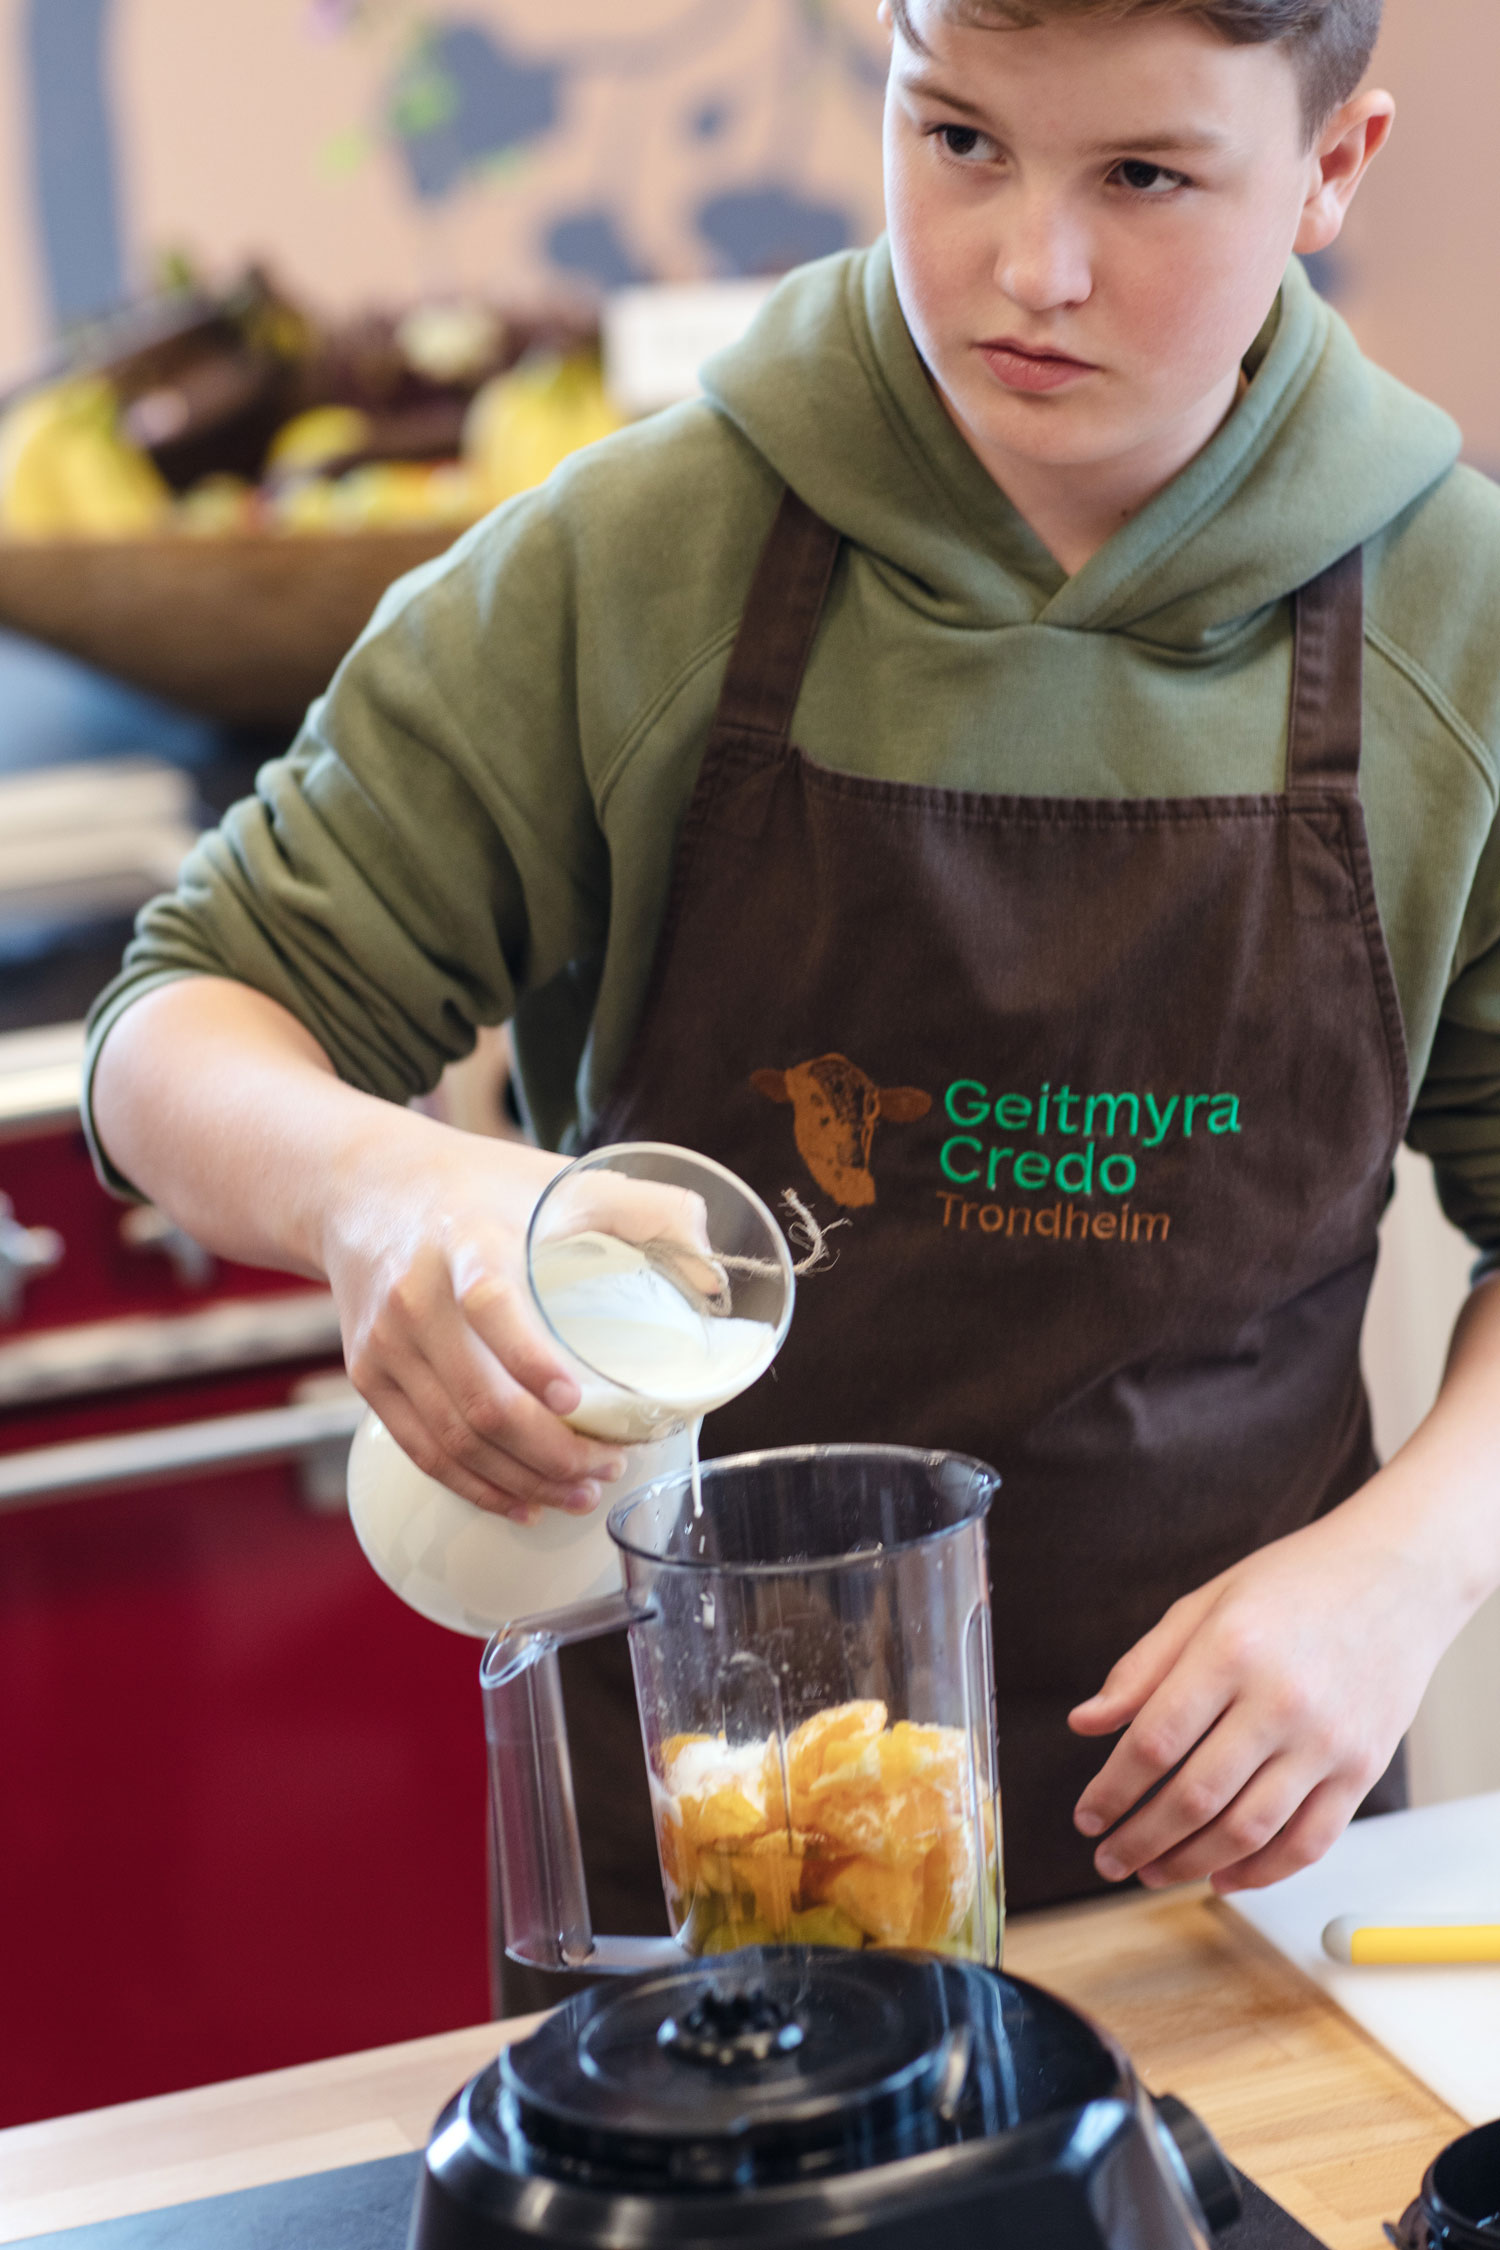 At Geitmyra, pupils in primary and lower secondary school can cook and learn about sustainable food production. Photo: Geir Mogen.